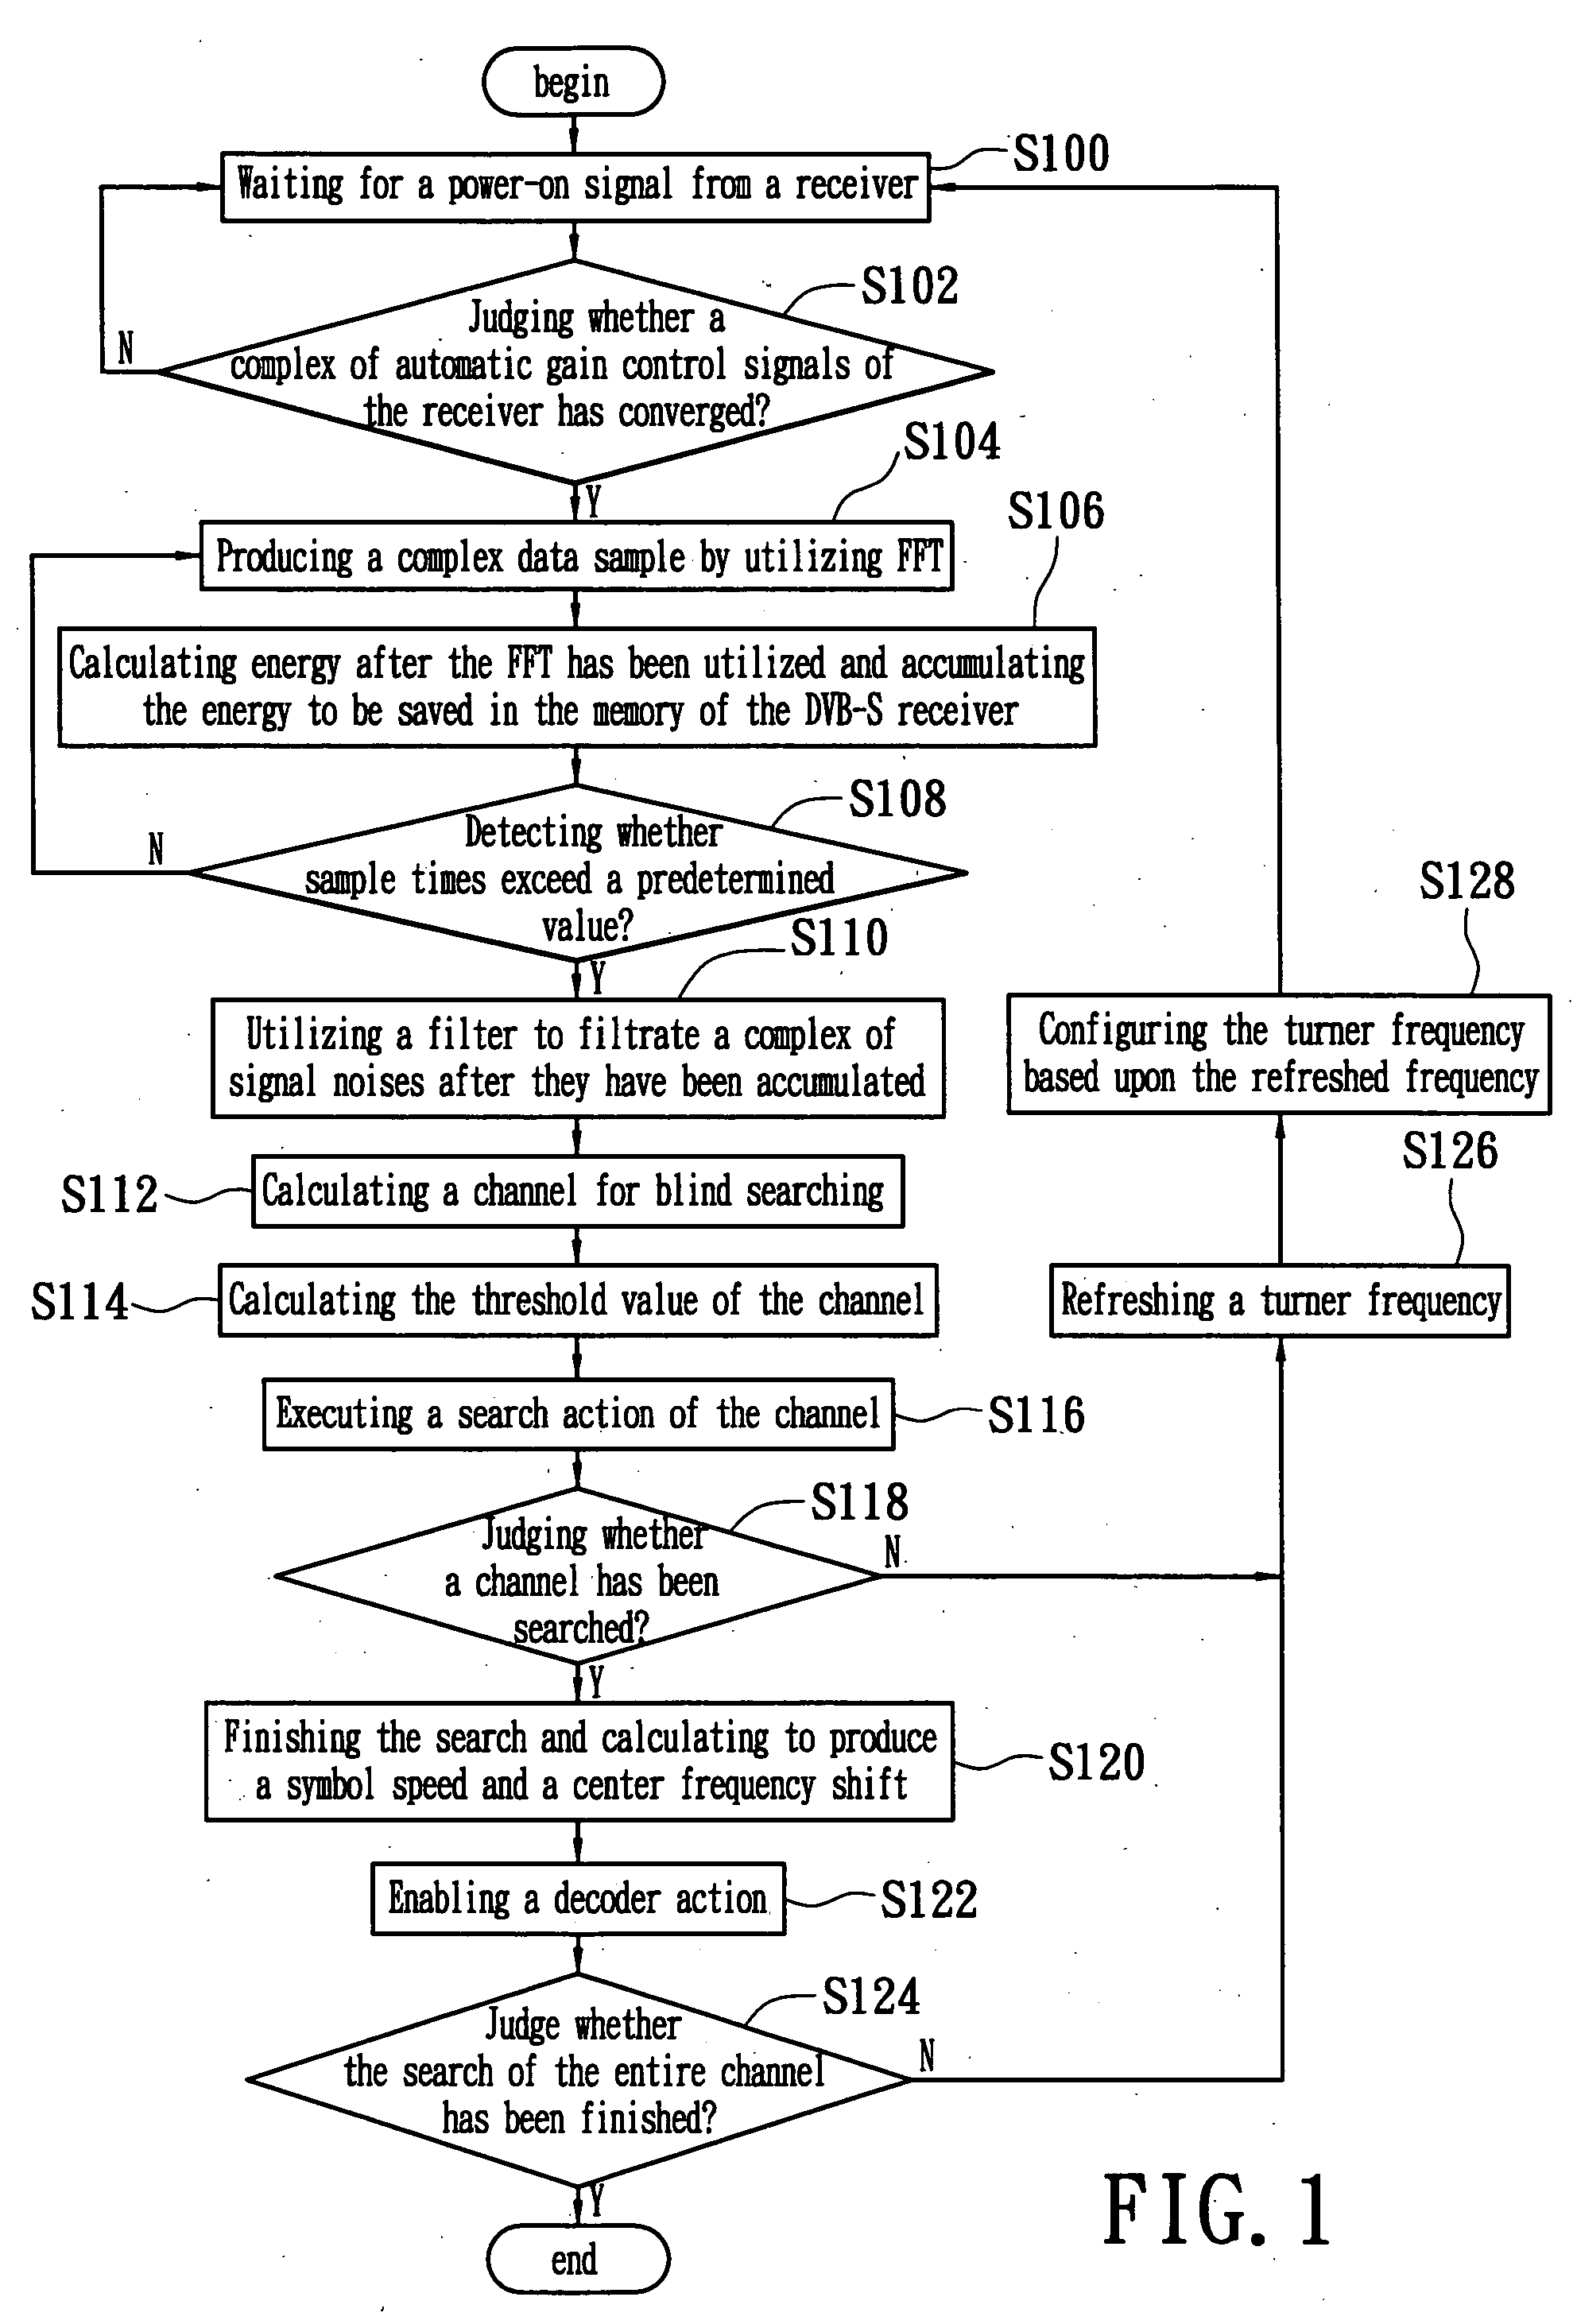 Method of blind channel searching and estimation using a fast fourier transform mechanism